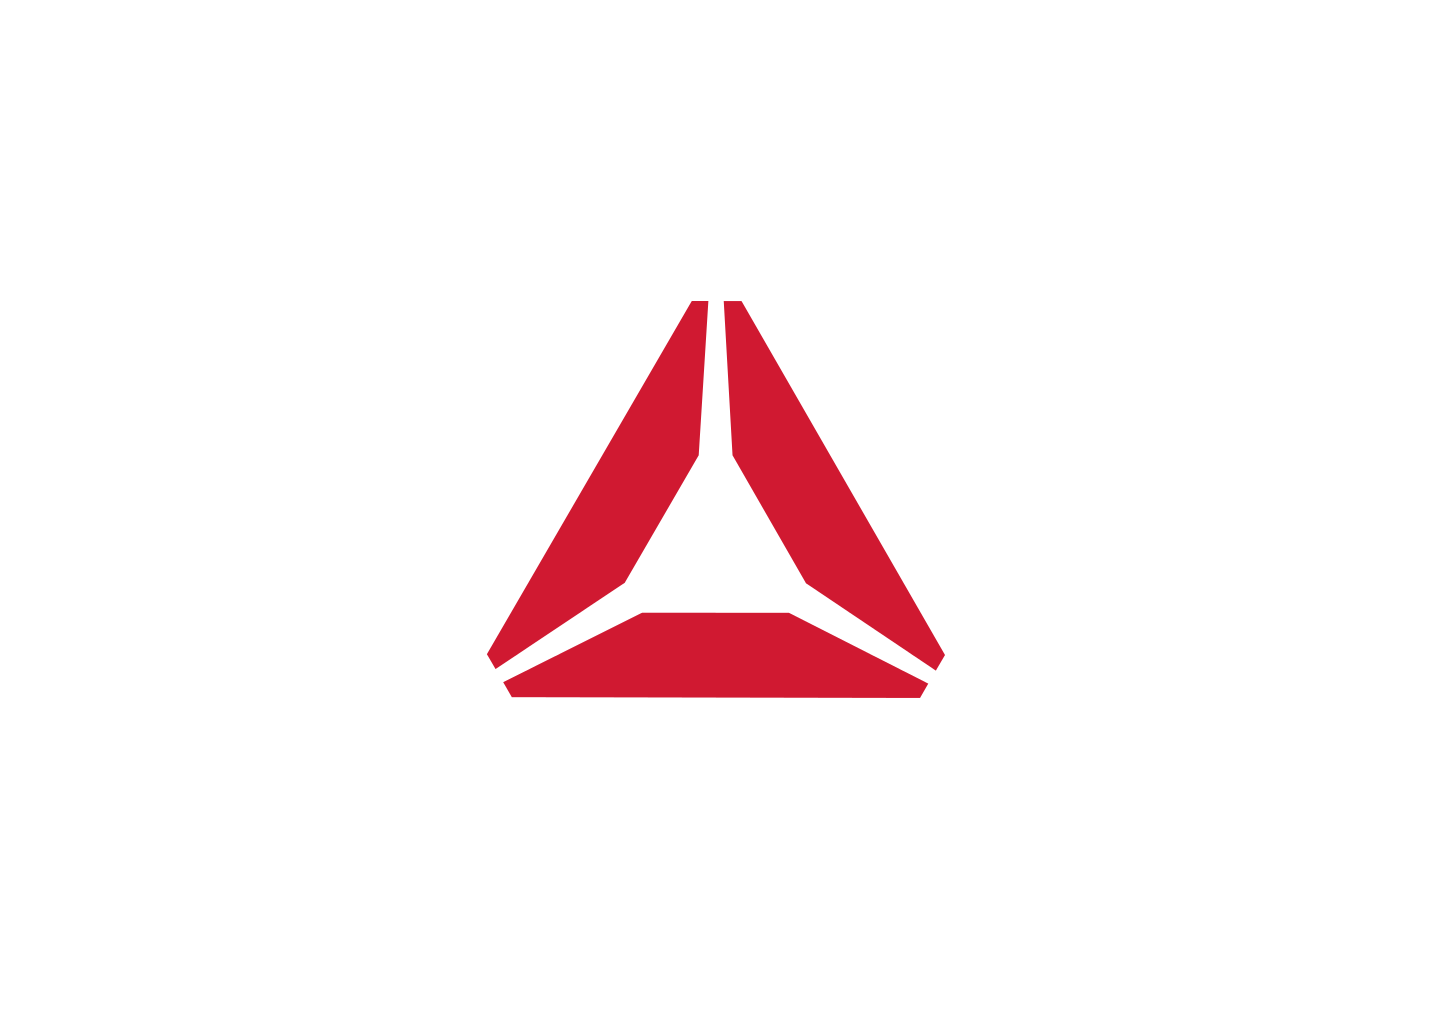 Four Red Triangles Logo - 4 red triangle Logos